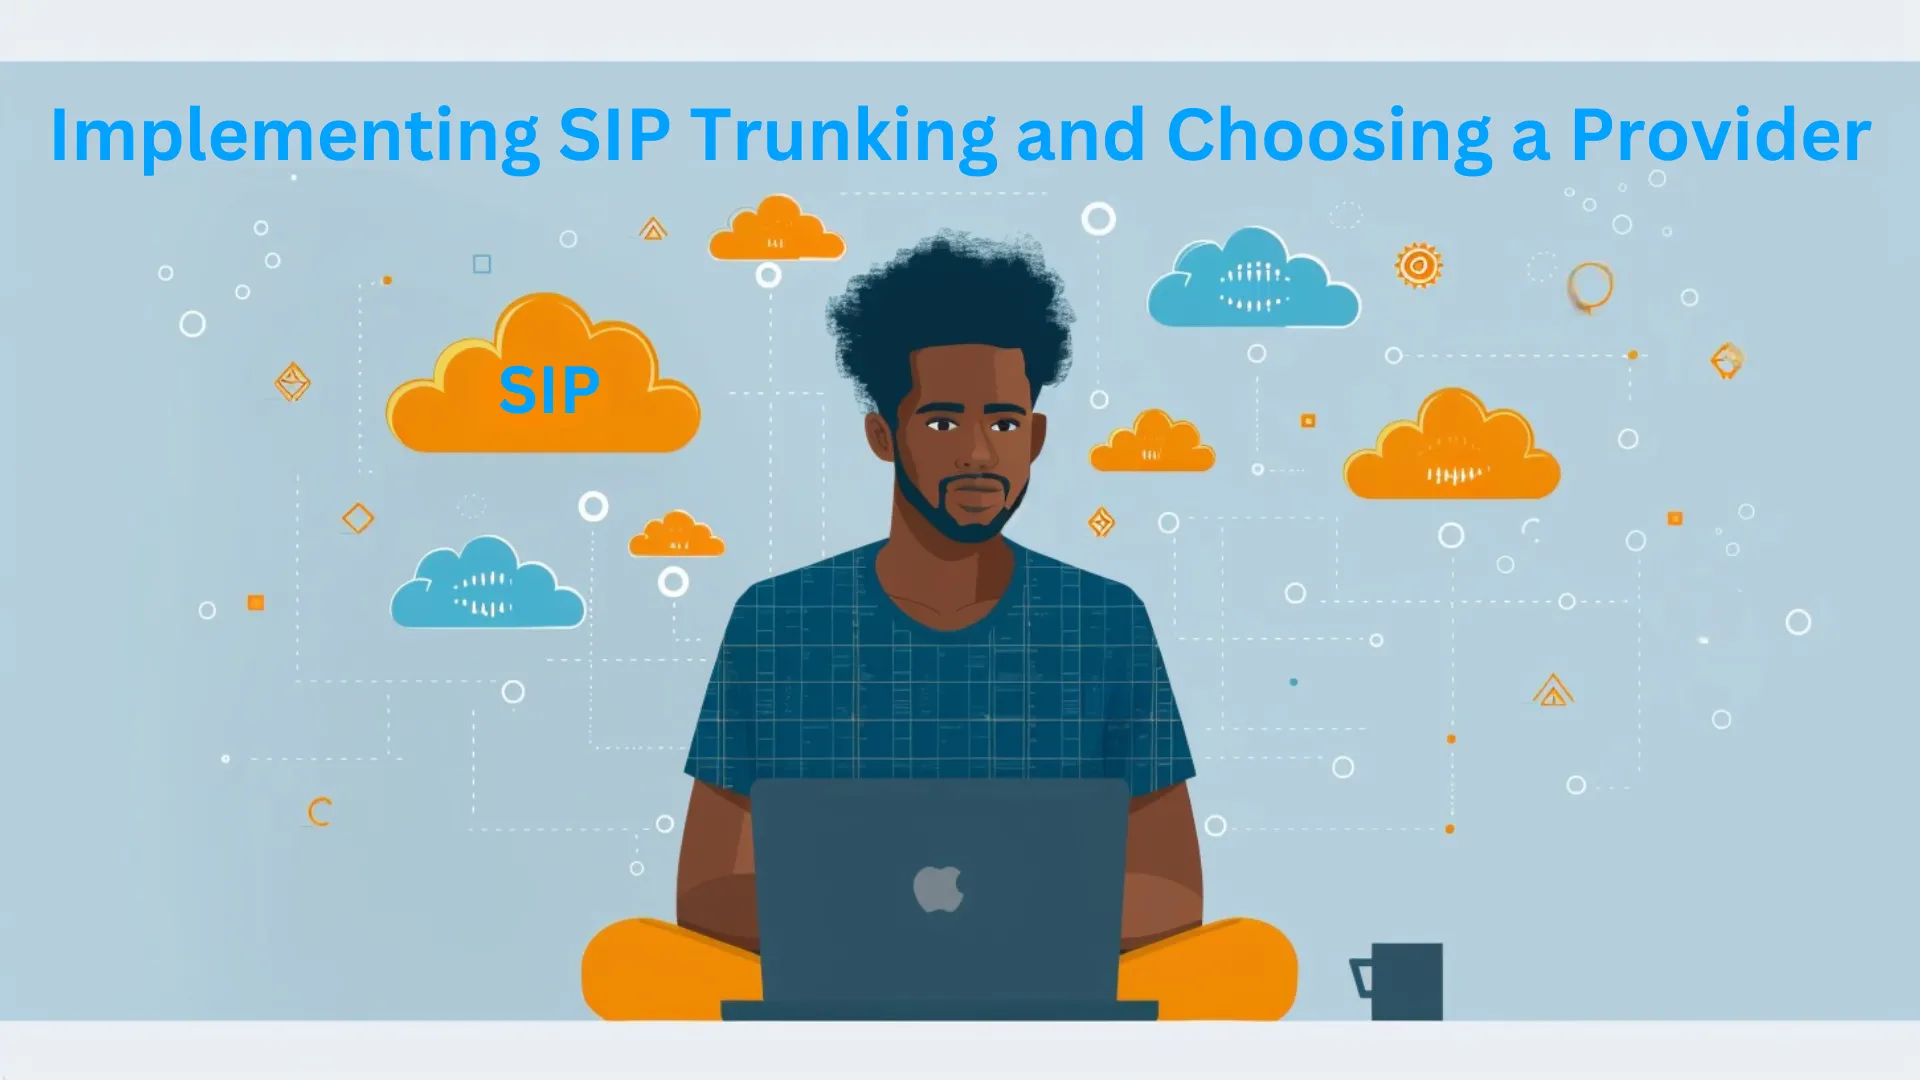 Implementing SIP Trunking and Choosing a Provider